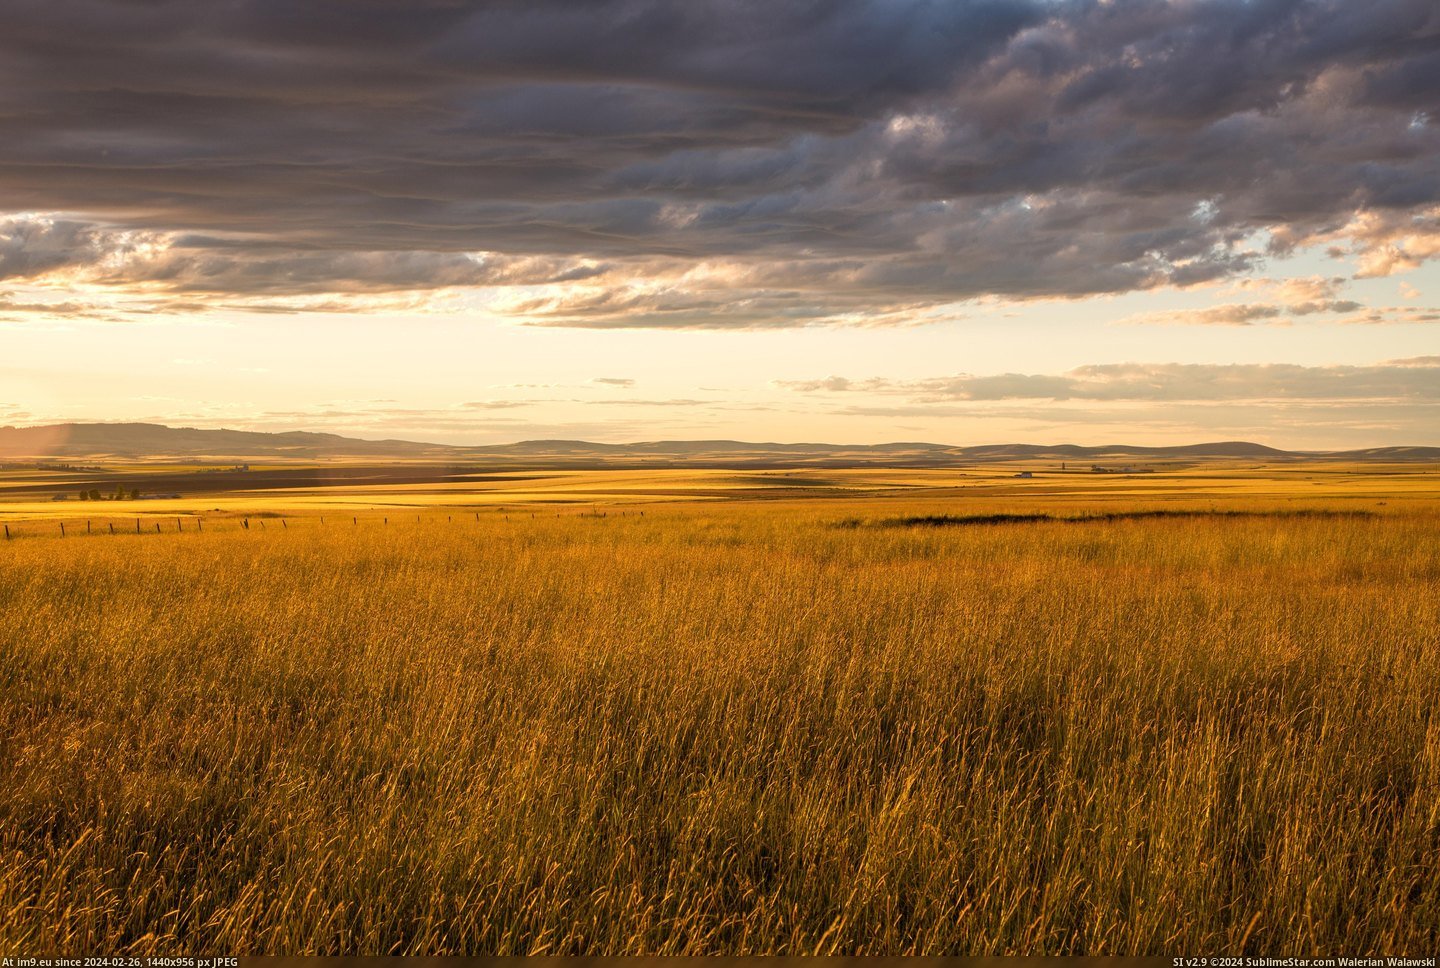 #Sunset #Golden #Wheat #Drenched #5000x3333 #Moscow #Fields [Earthporn] Wheat fields drenched in a golden sunset near Moscow, ID [OC][5000x3333] Pic. (Image of album My r/EARTHPORN favs))